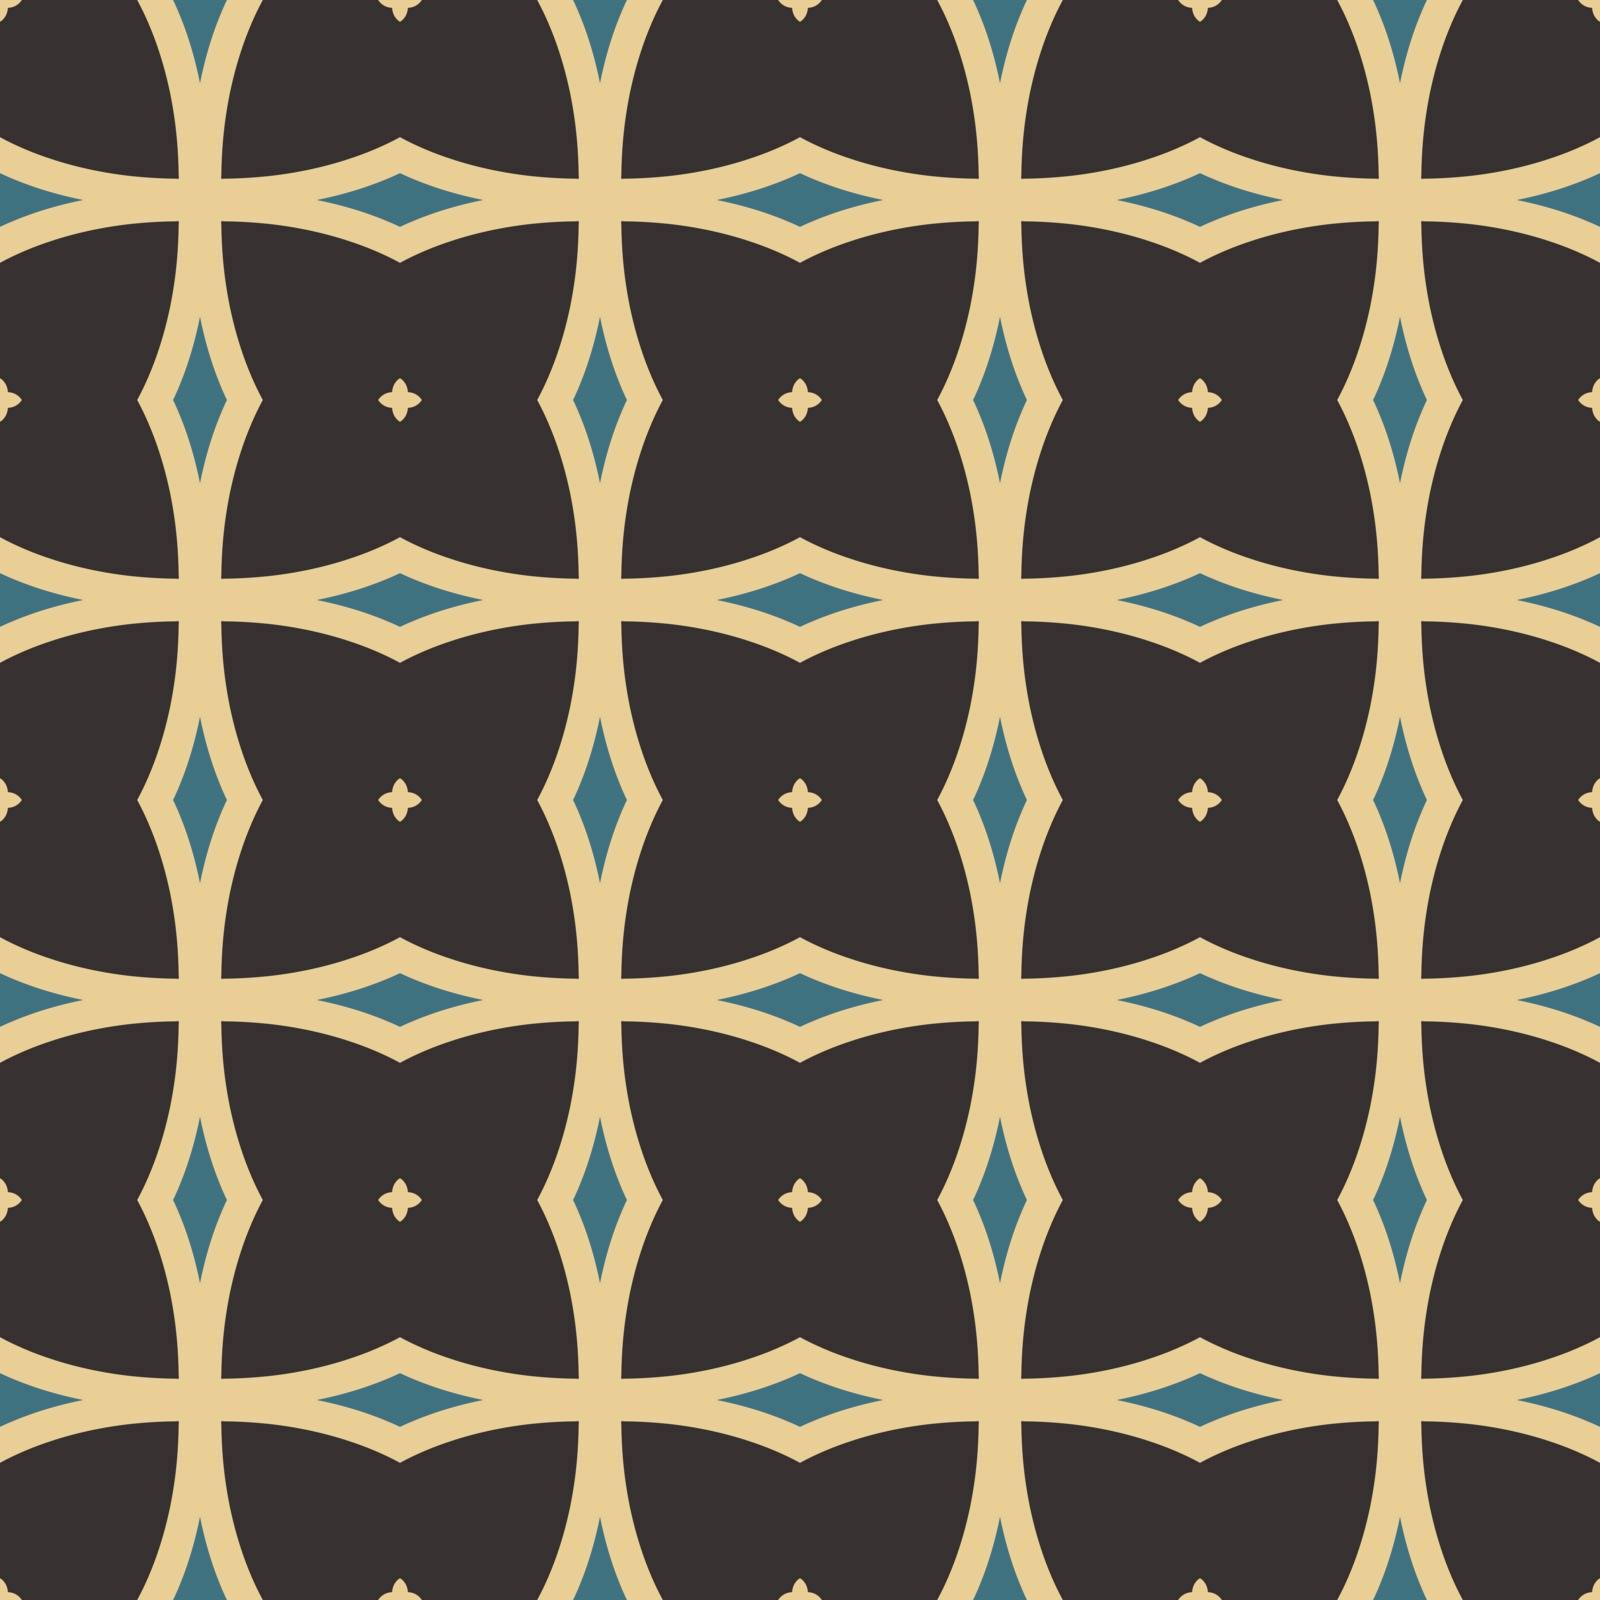 Seamless illustrated pattern made of abstract elements in beige, blue and black